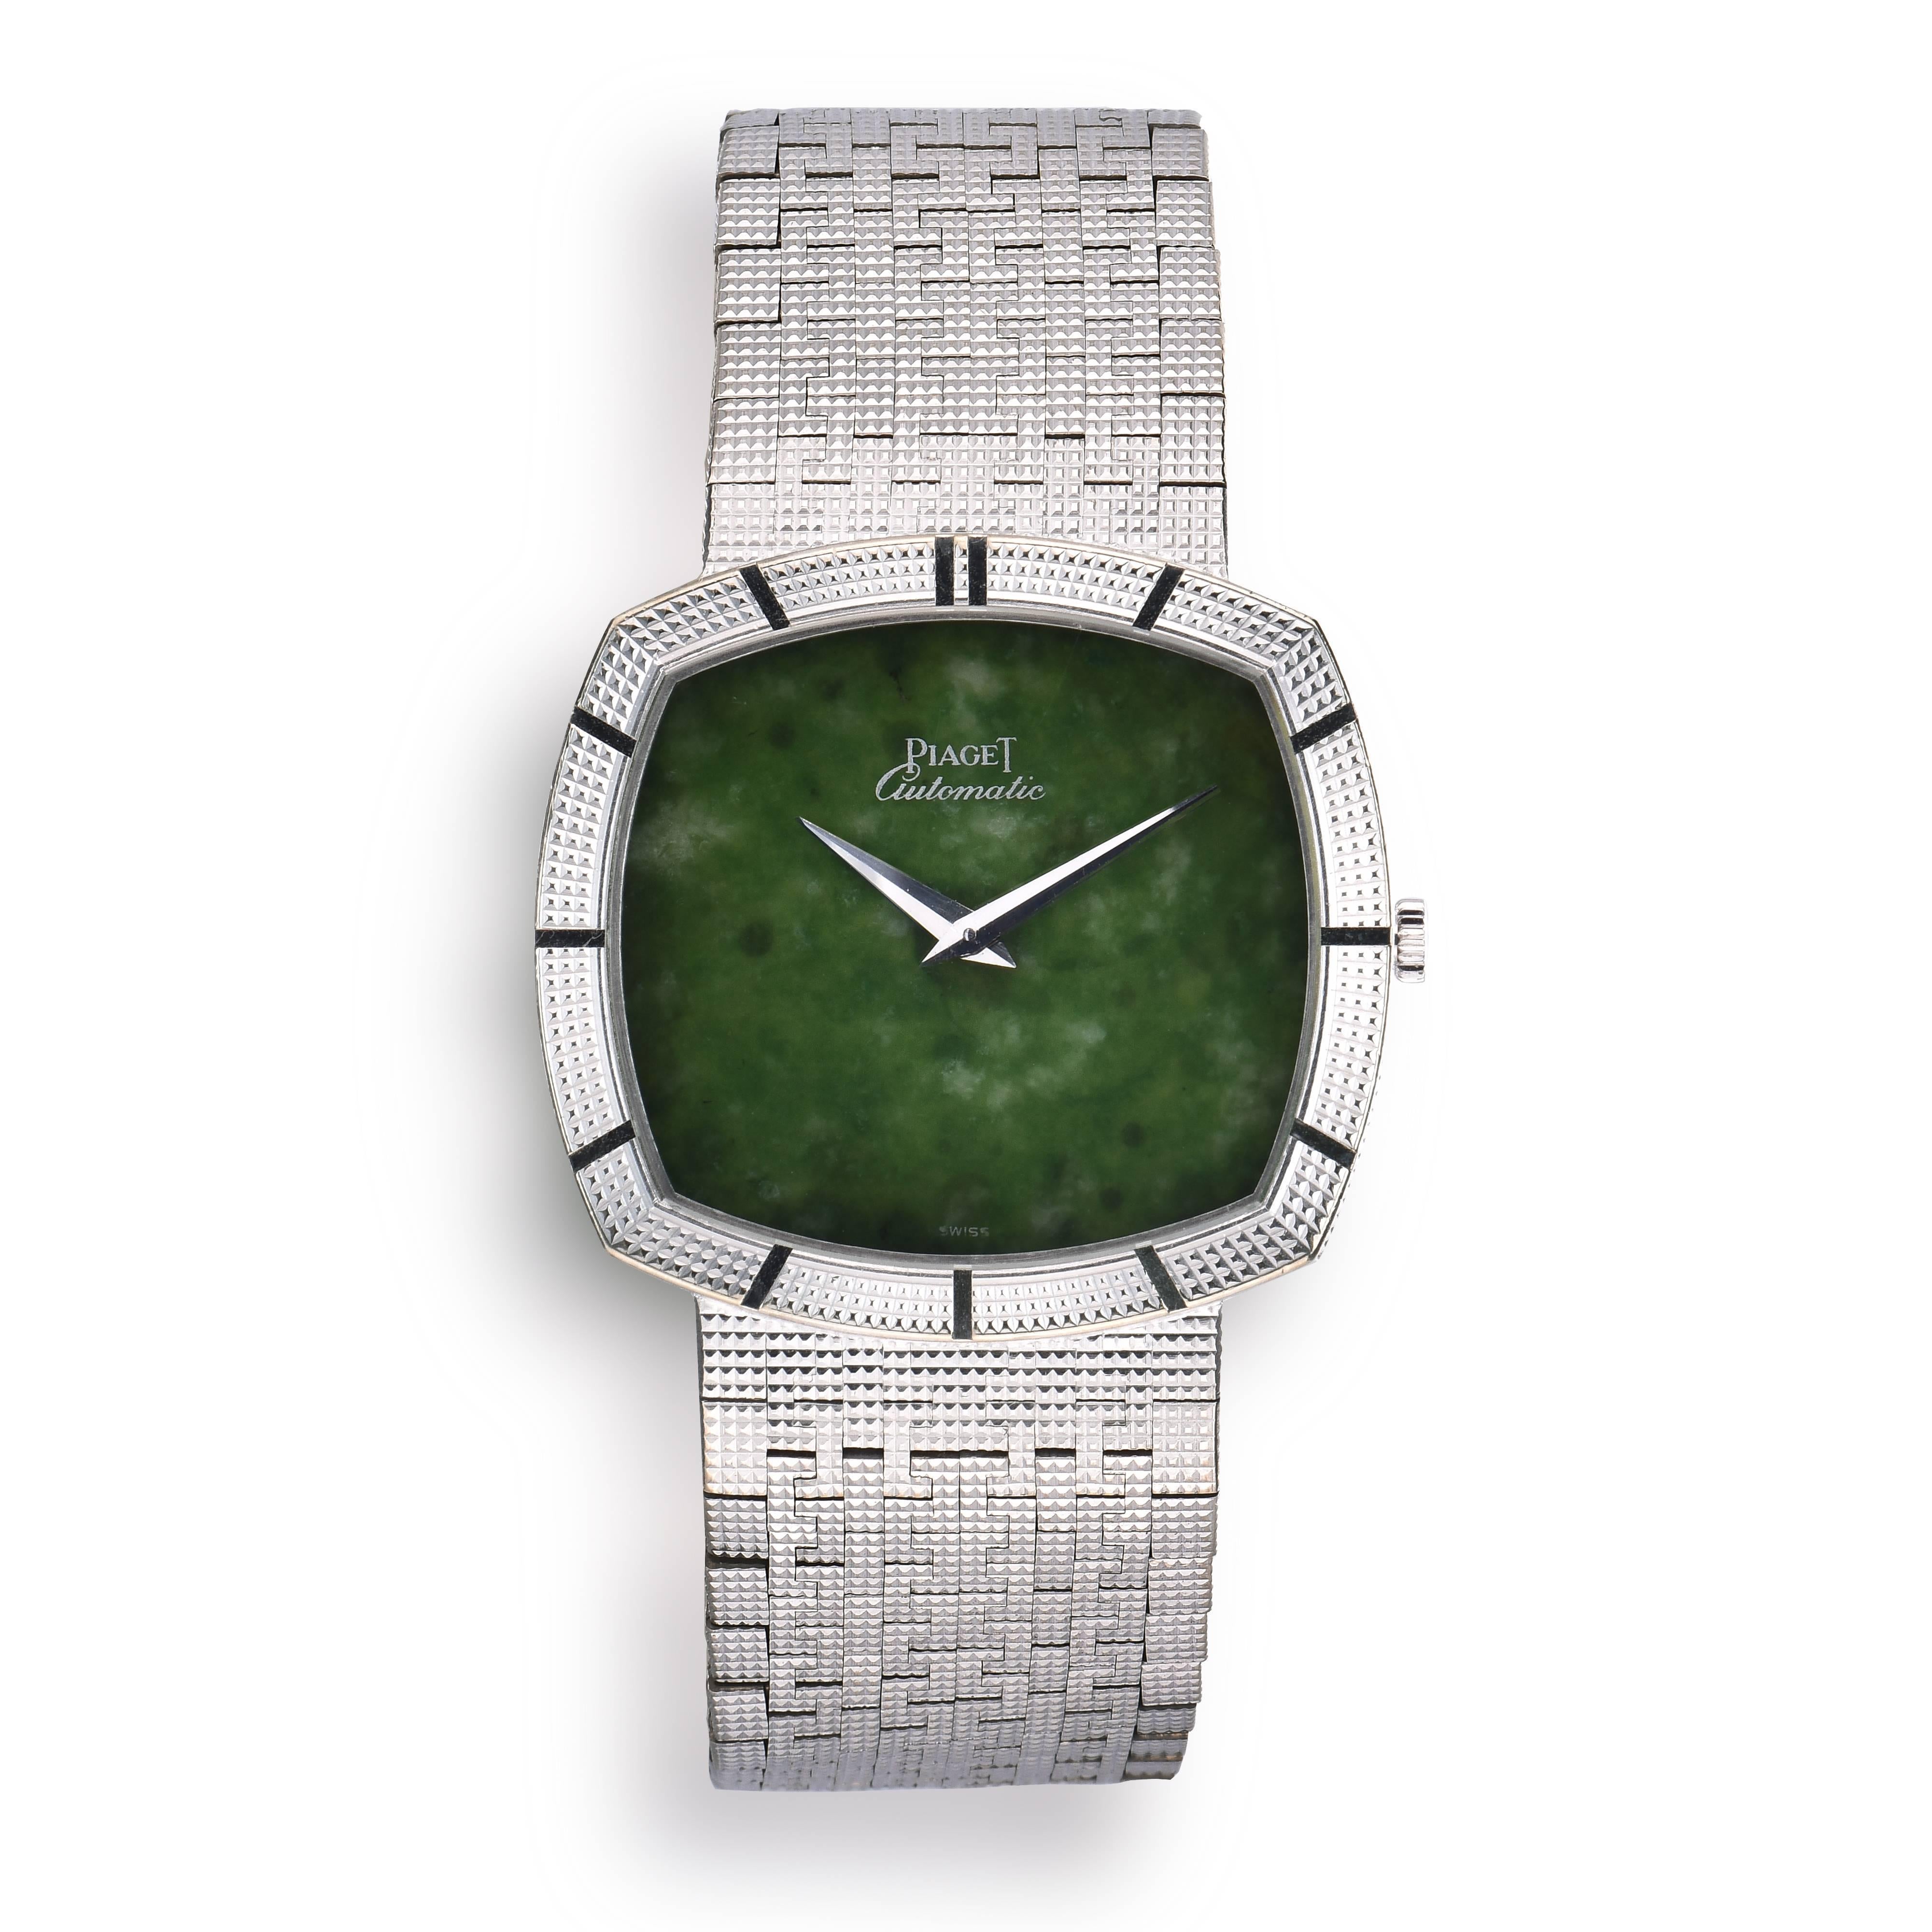 Piaget 18K White Gold Automatic Watch
Factory 'Jade' Green Stone Dial in Mint Condition
Piaget Automatic Movement
18k White Gold Case
18K White Gold Integrated Bracelet with Piaget Signed Clasp
Measure 33mm x 30mm
7.75 Inches in